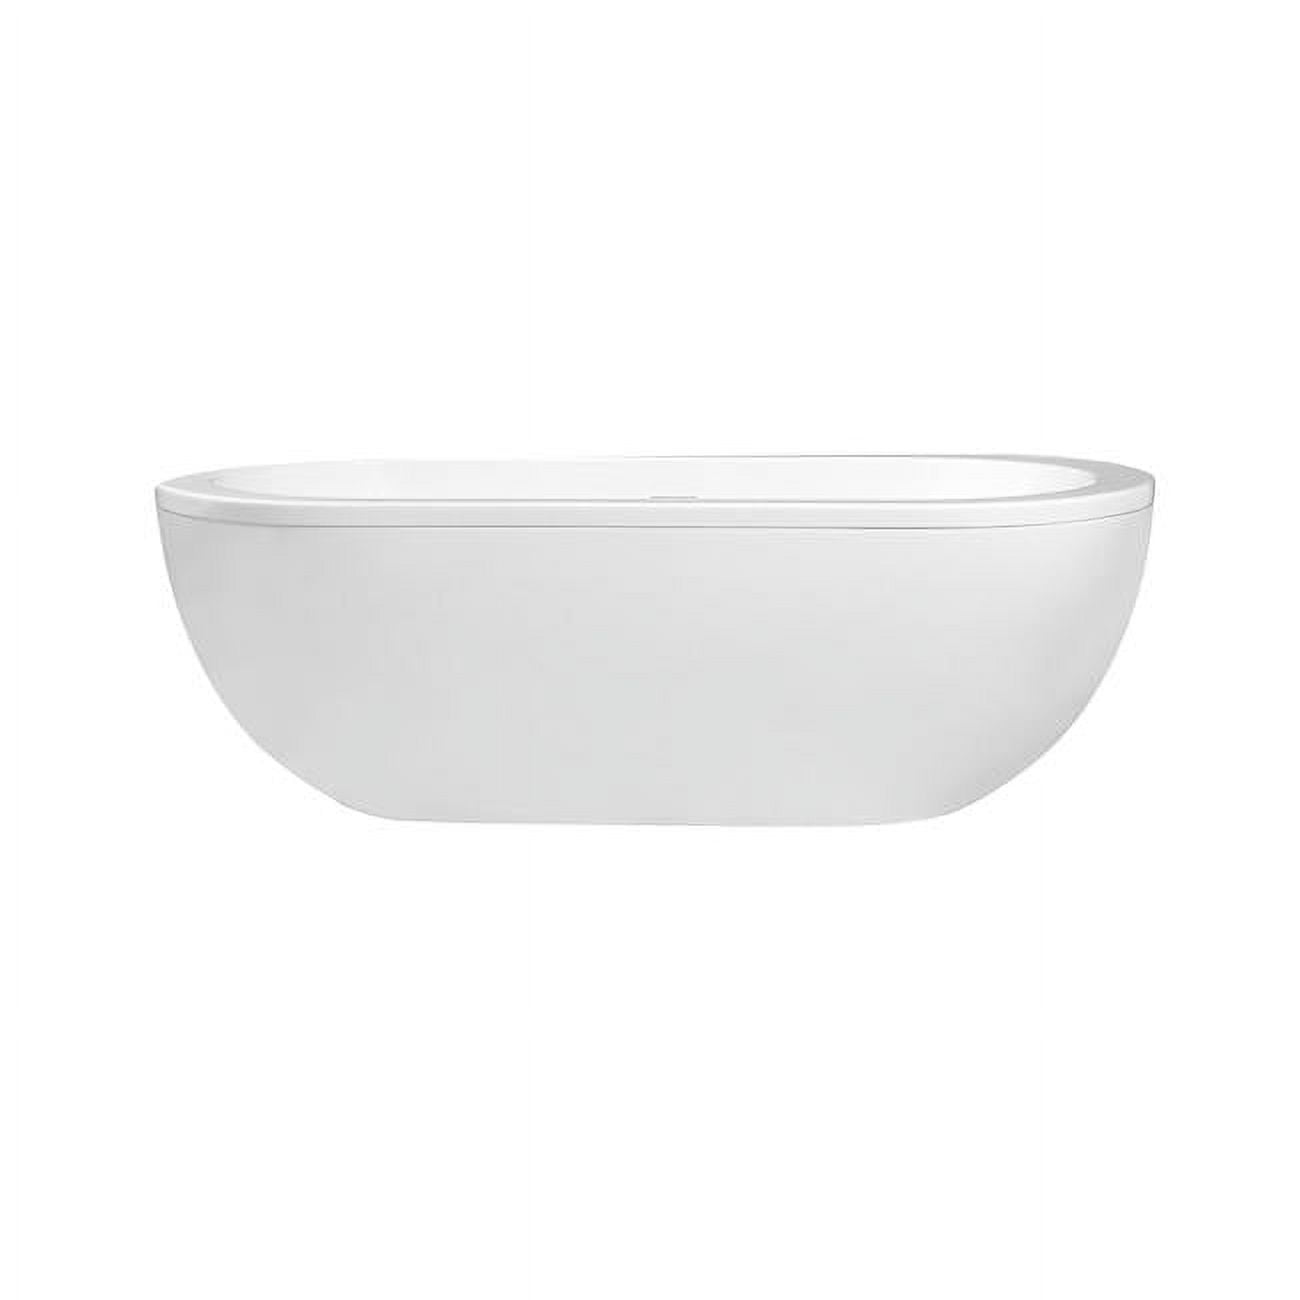 Picture of Cahaba CA401006-WH 23.25 x 33.75 x 71 in. Sacha Freestanding Acrylic Tub in Glossy White with White Drain